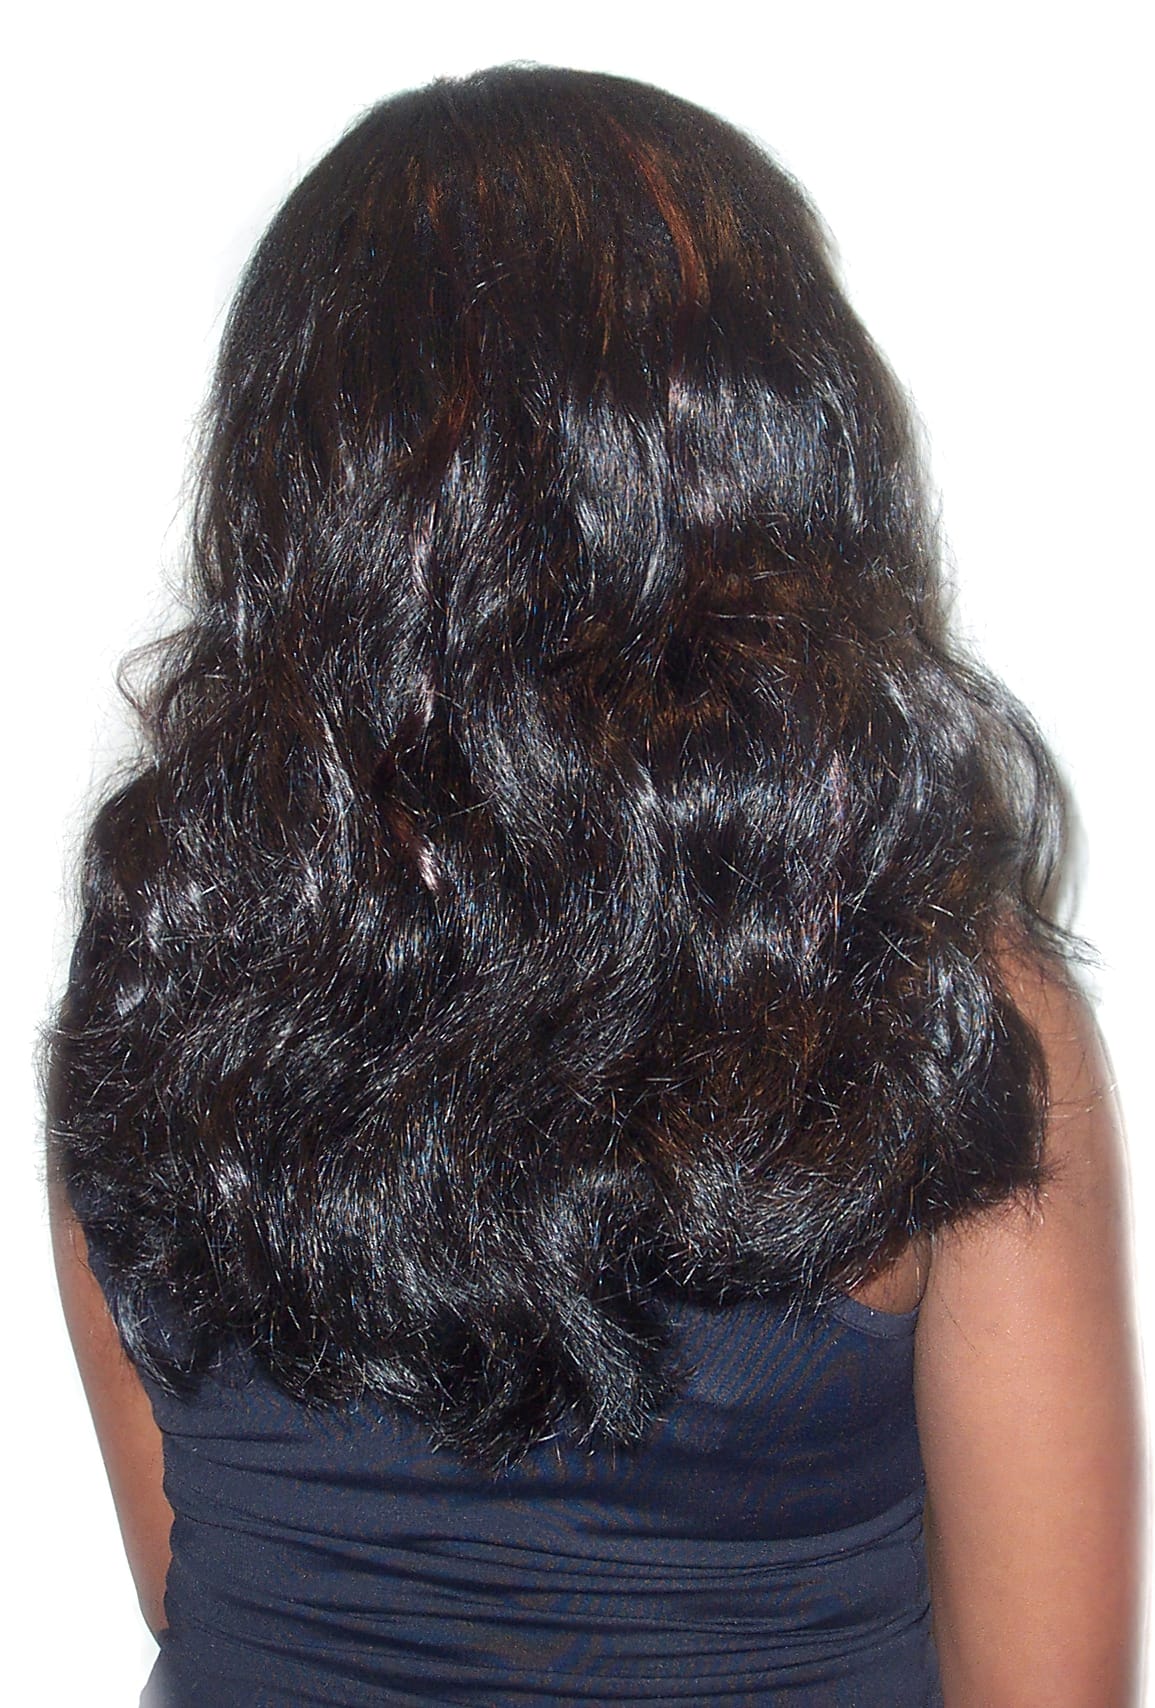 After Picture - Traction Alopecia from Clip-In Hairpiece